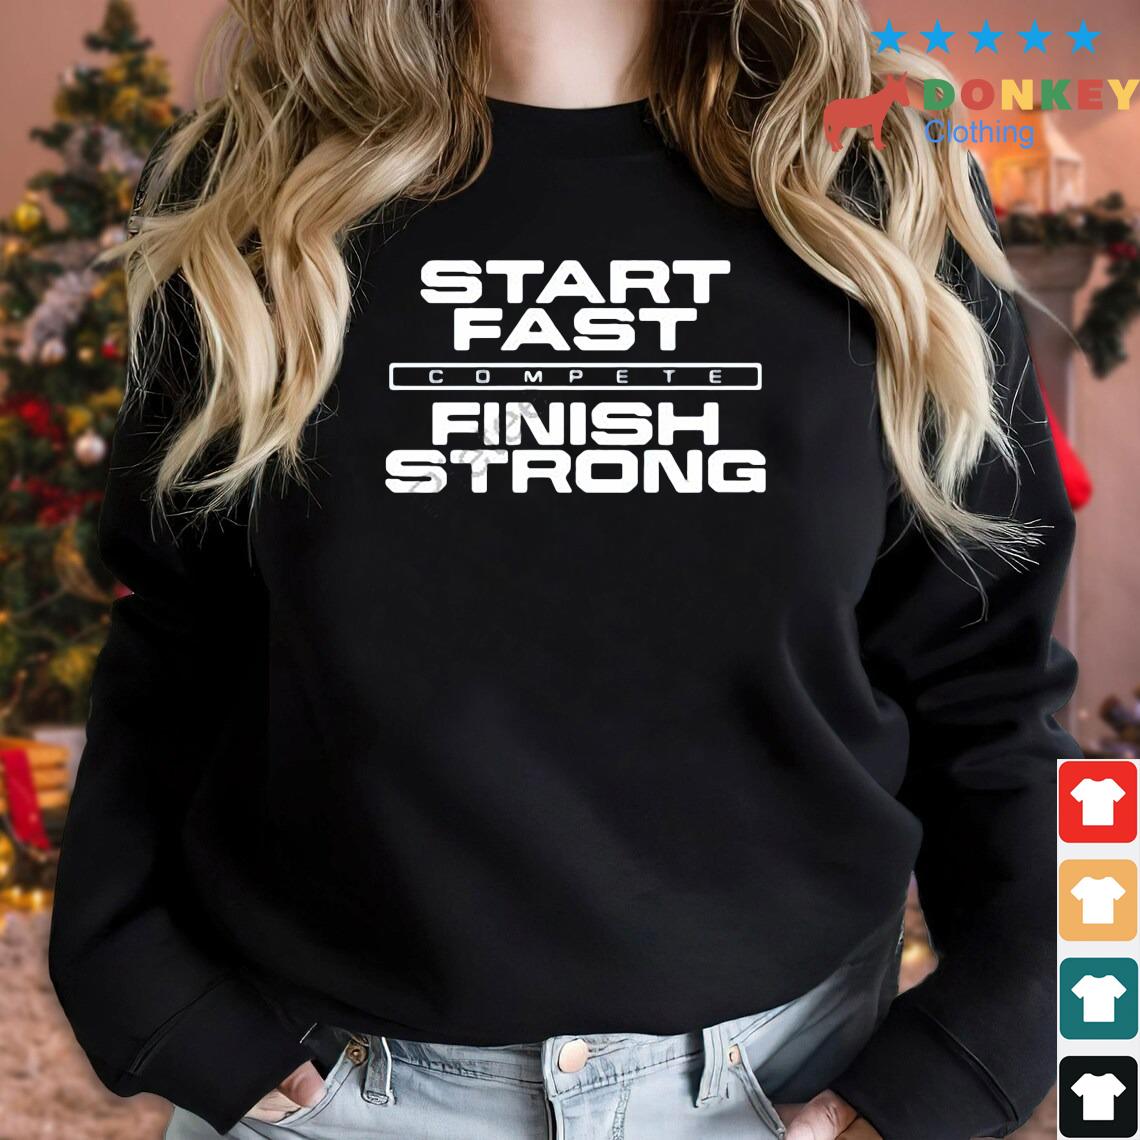 Start Fast Compete Finish Strong Shirt